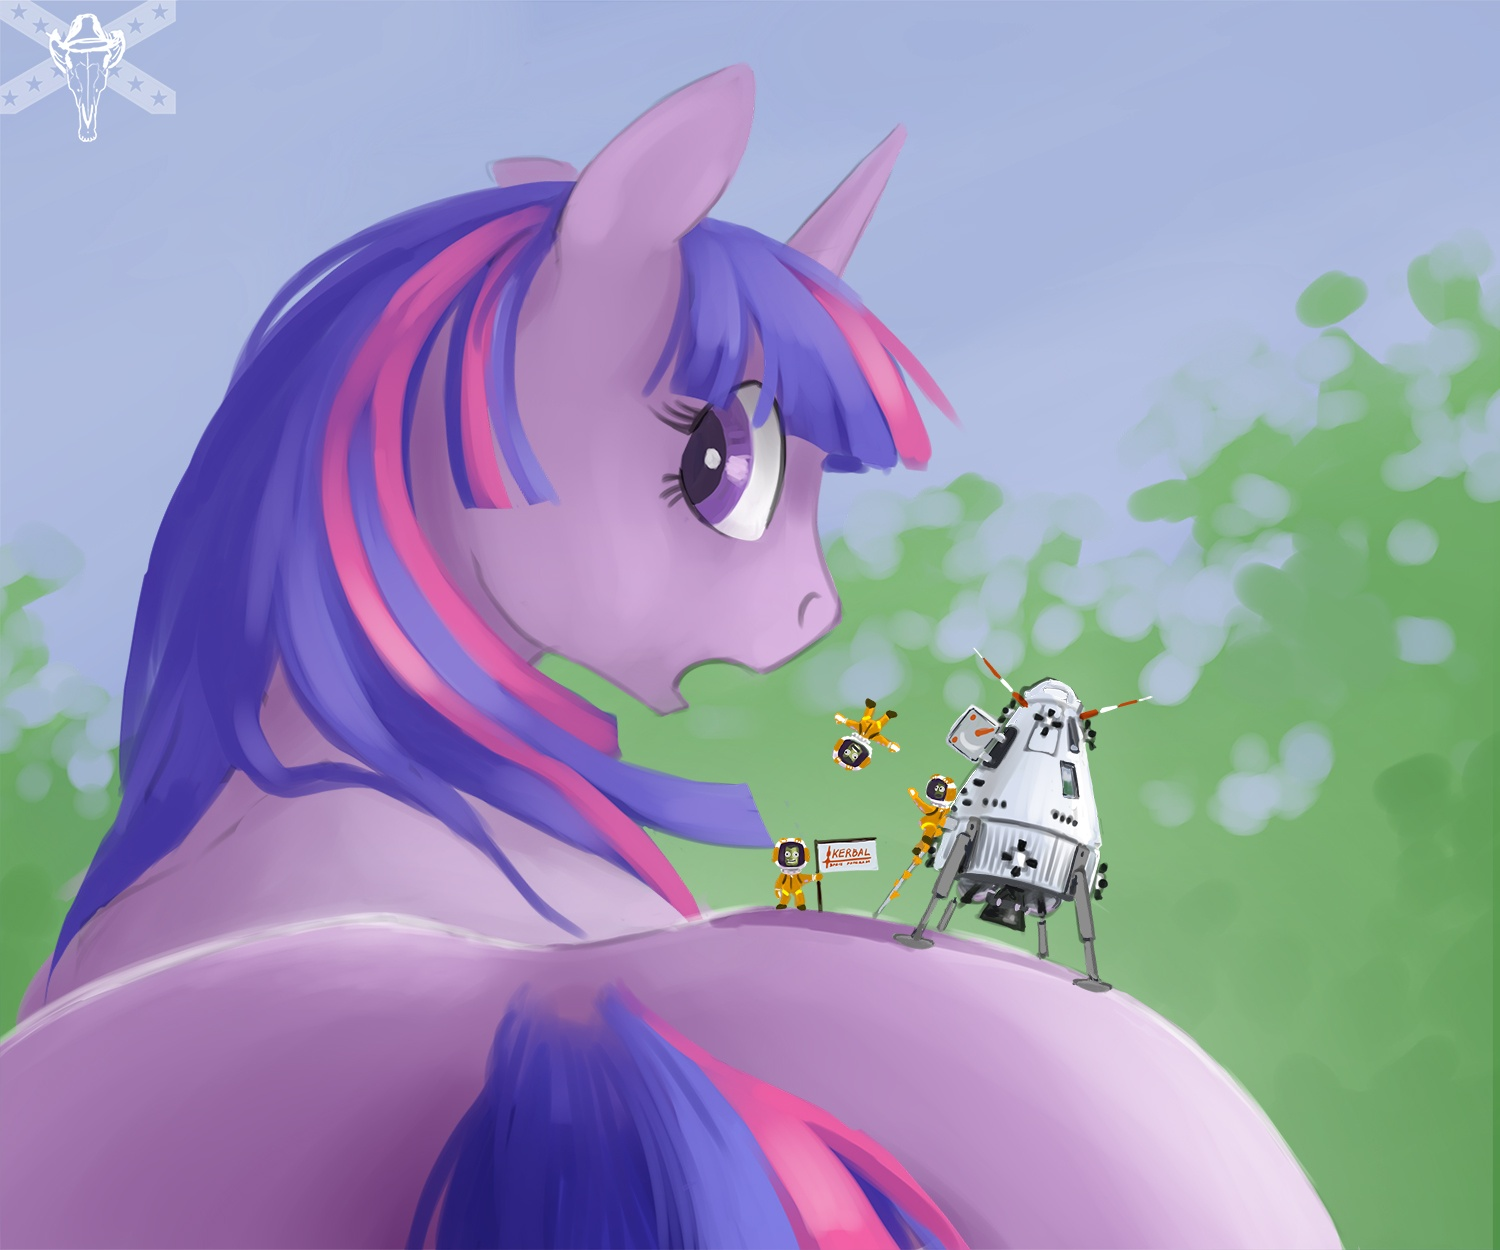 Landing was successful - My little pony, Twilight sparkle, MLP Edge, Kerbal space program, Crossover, Crossover